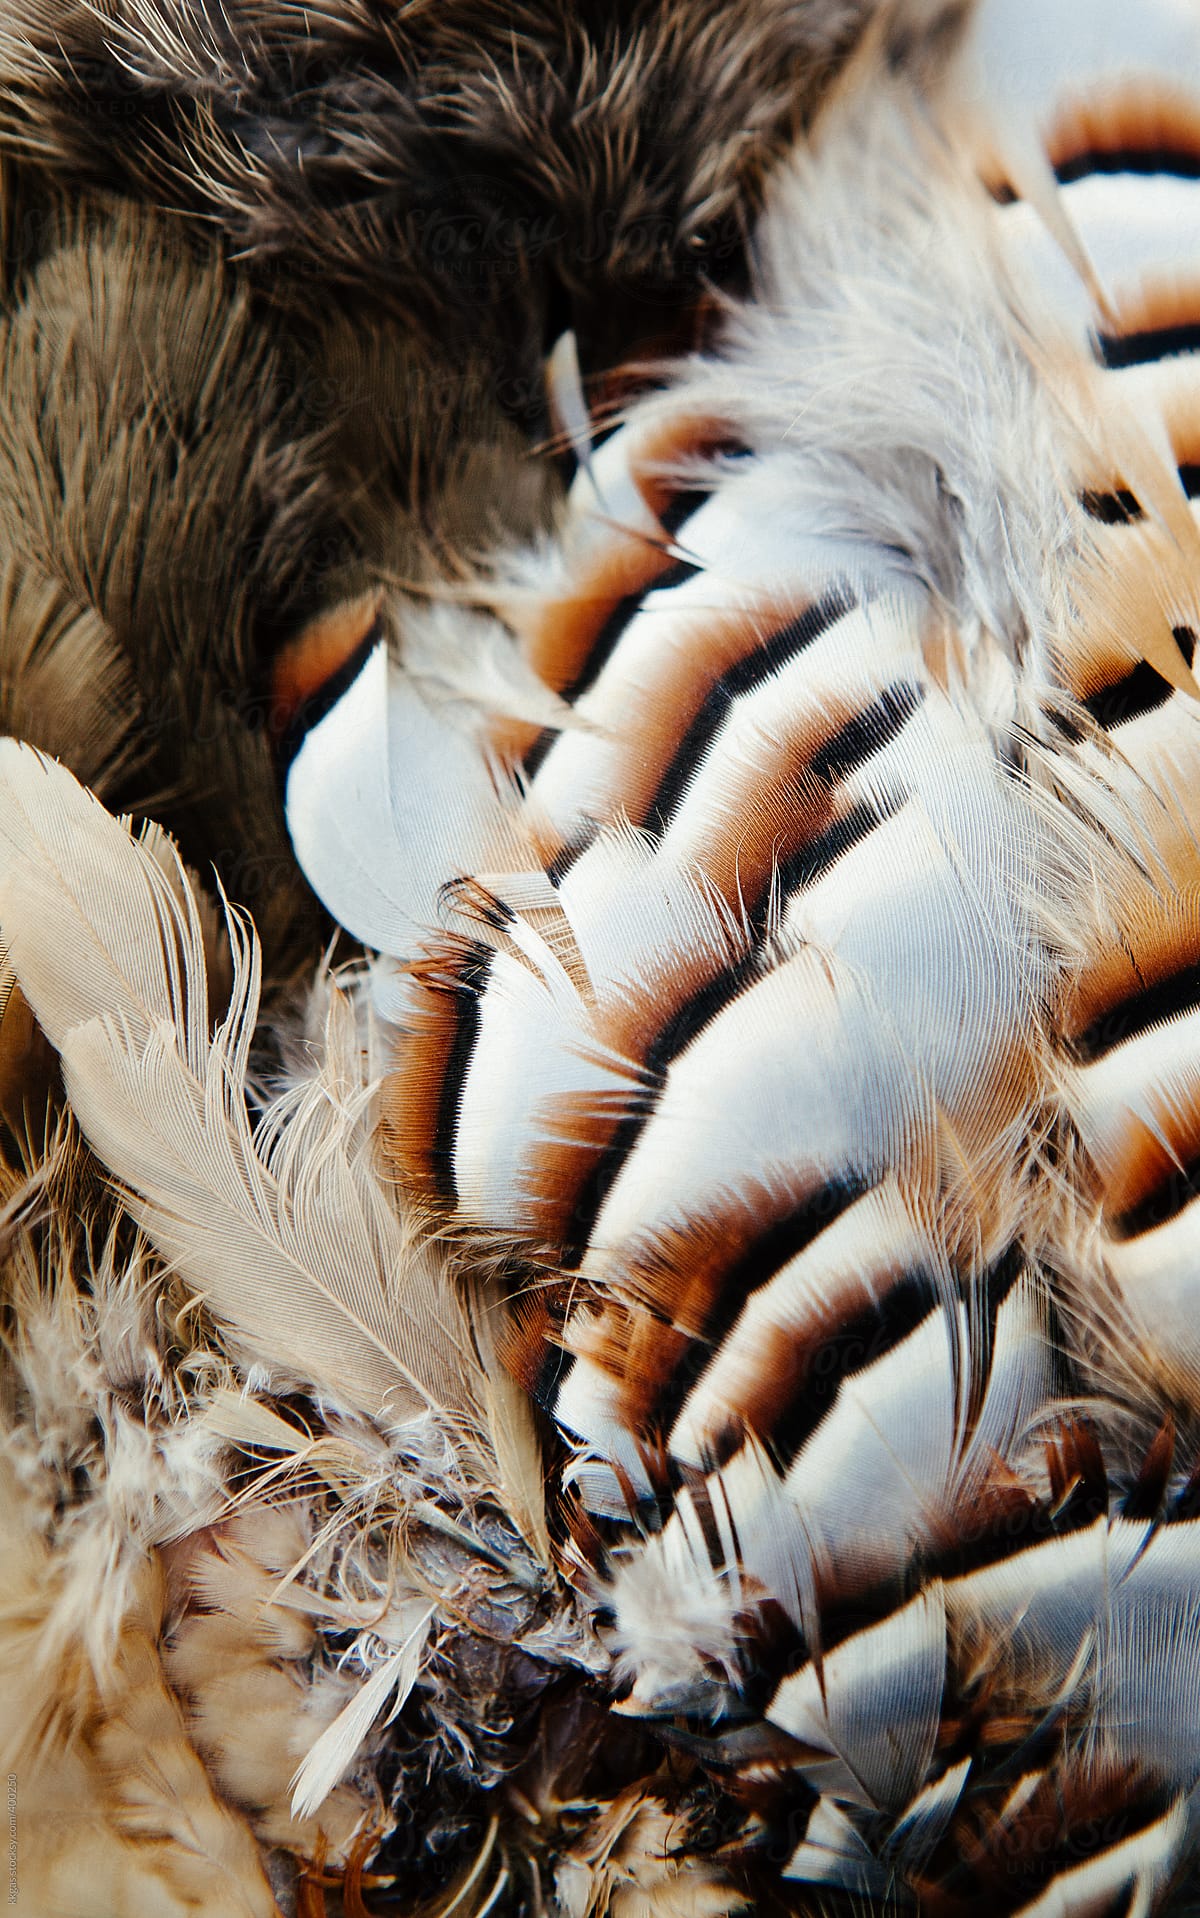 Partridge feathers by kkgas - Stocksy United